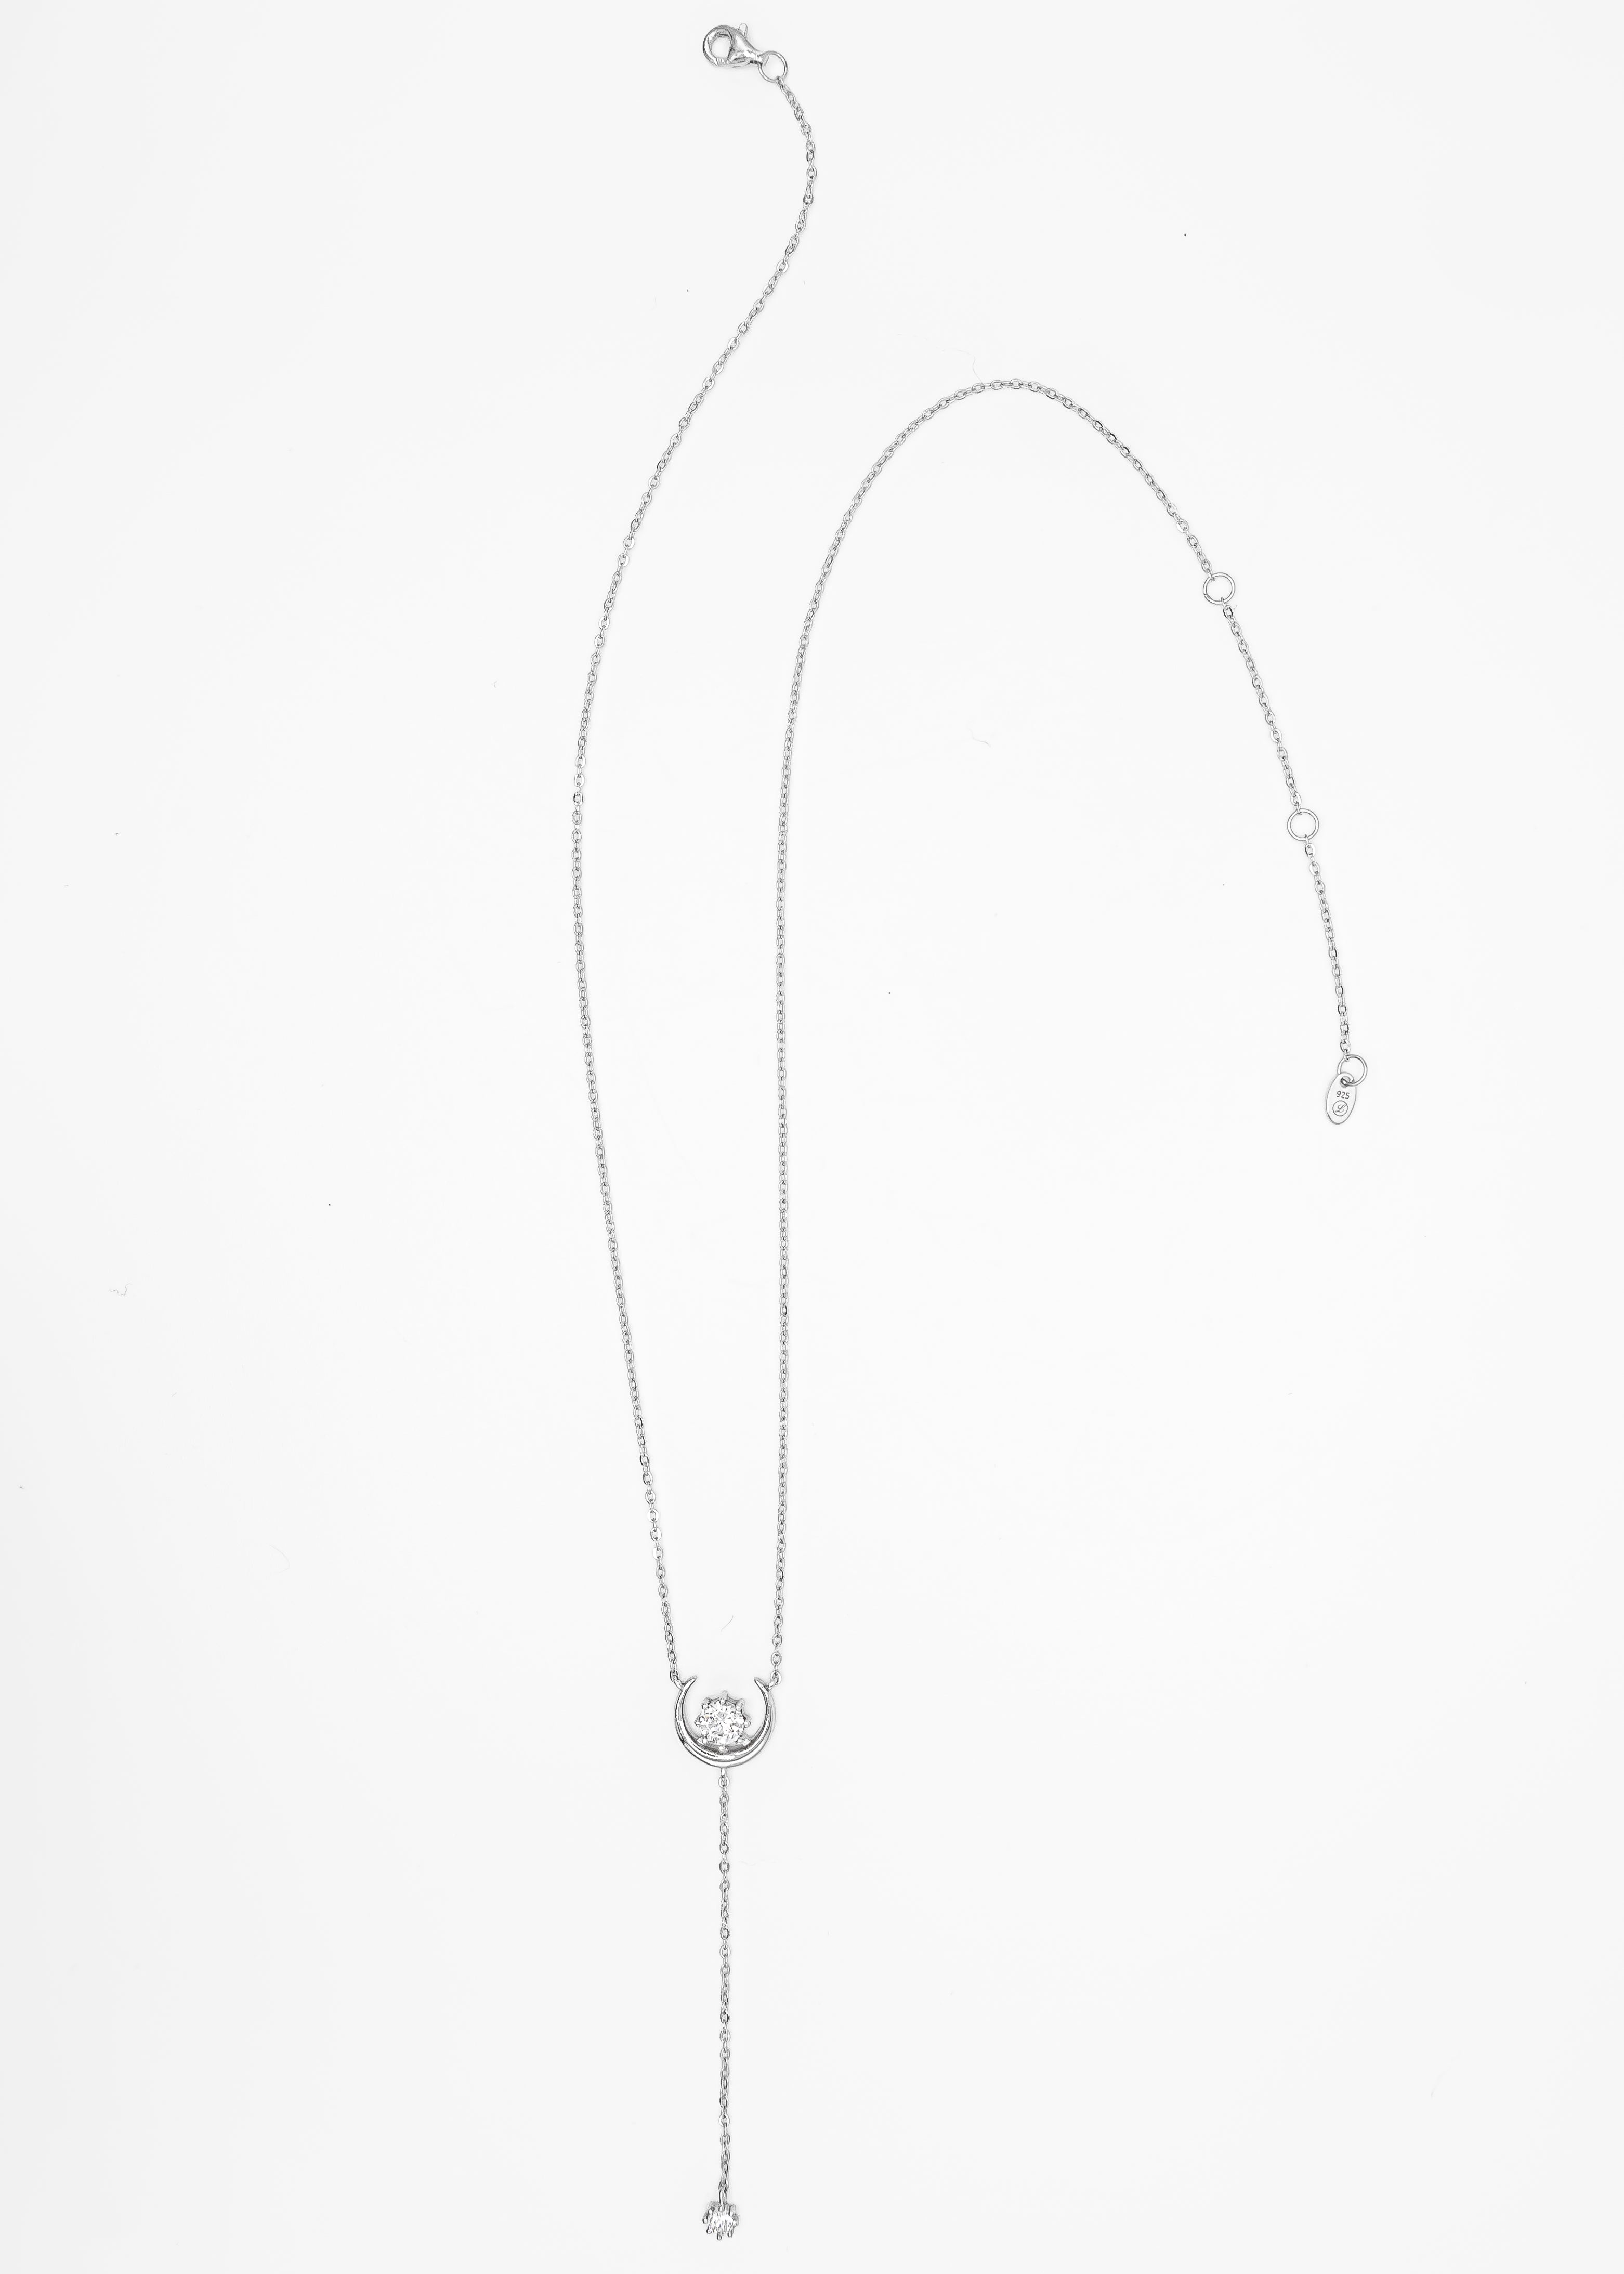 Moon Lariat Necklace